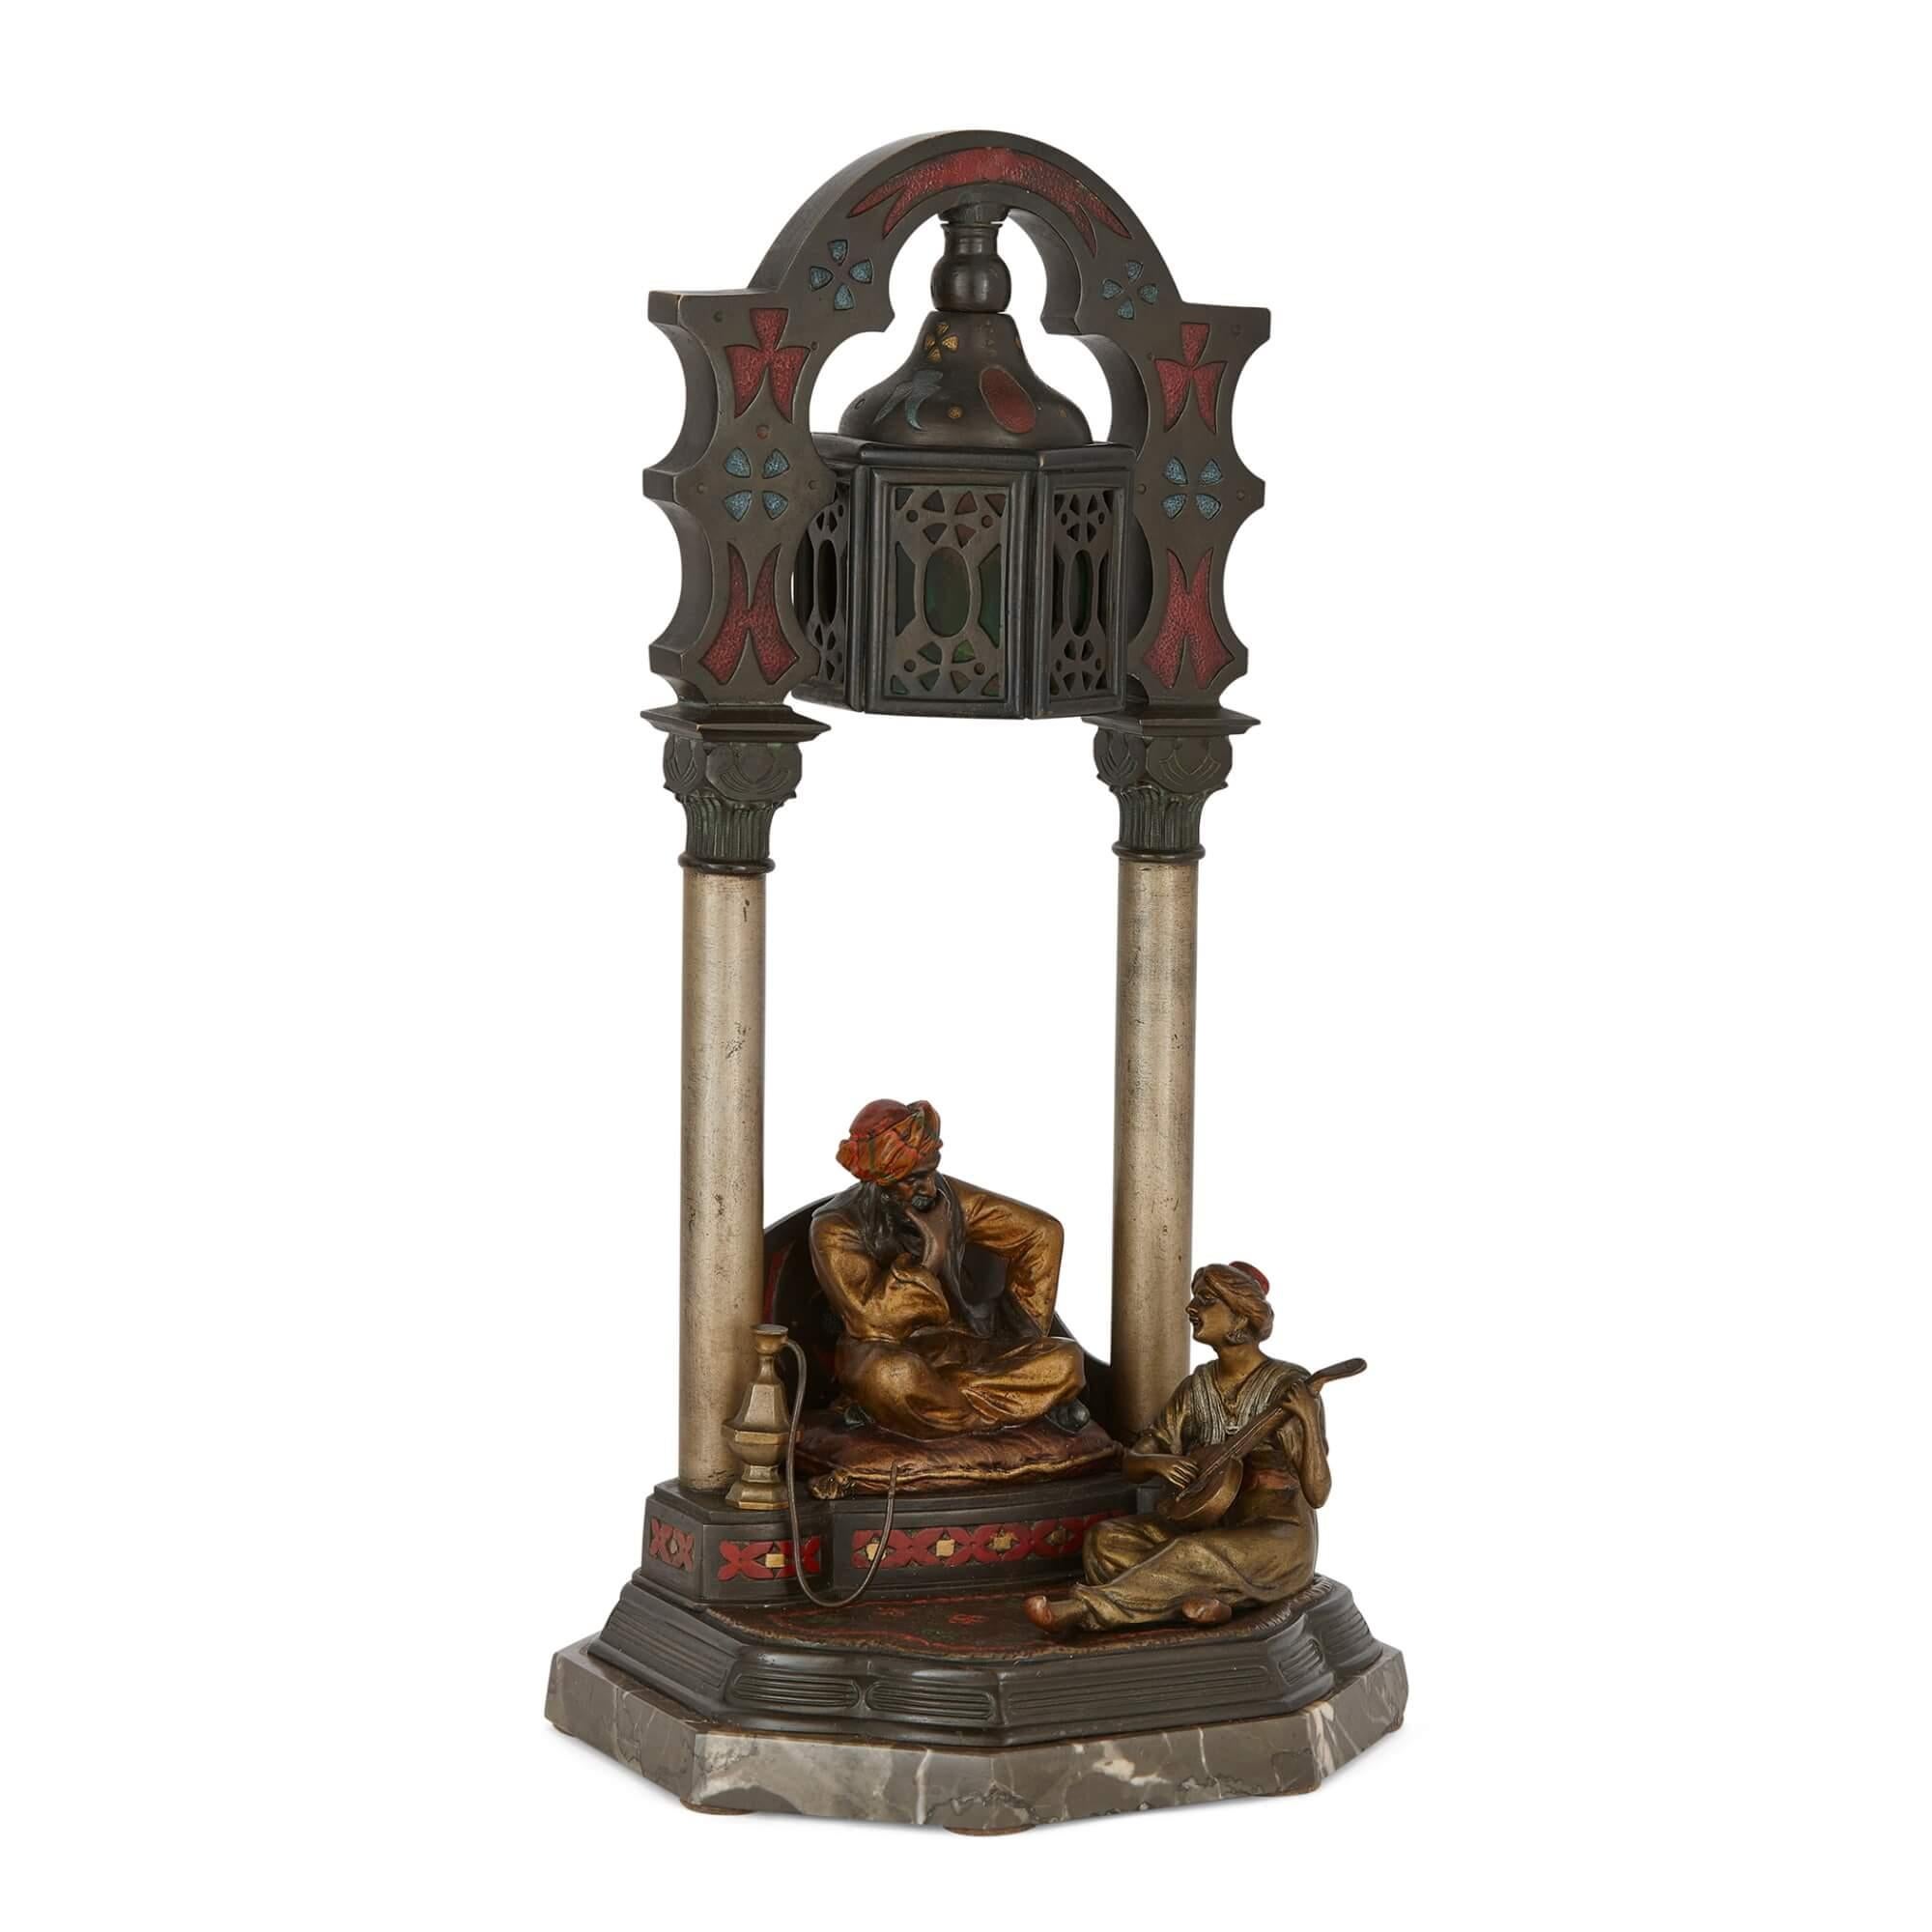 Large Austrian Islamic-style cold-painted bronze lamp
Austrian, Early 20th Century
Height 39cm, width 19cm, depth 17.5cm

Drawing upon the mystical allure of early 20th-century Orientalist designs, this Viennese bronze lamp serves as a magnificent